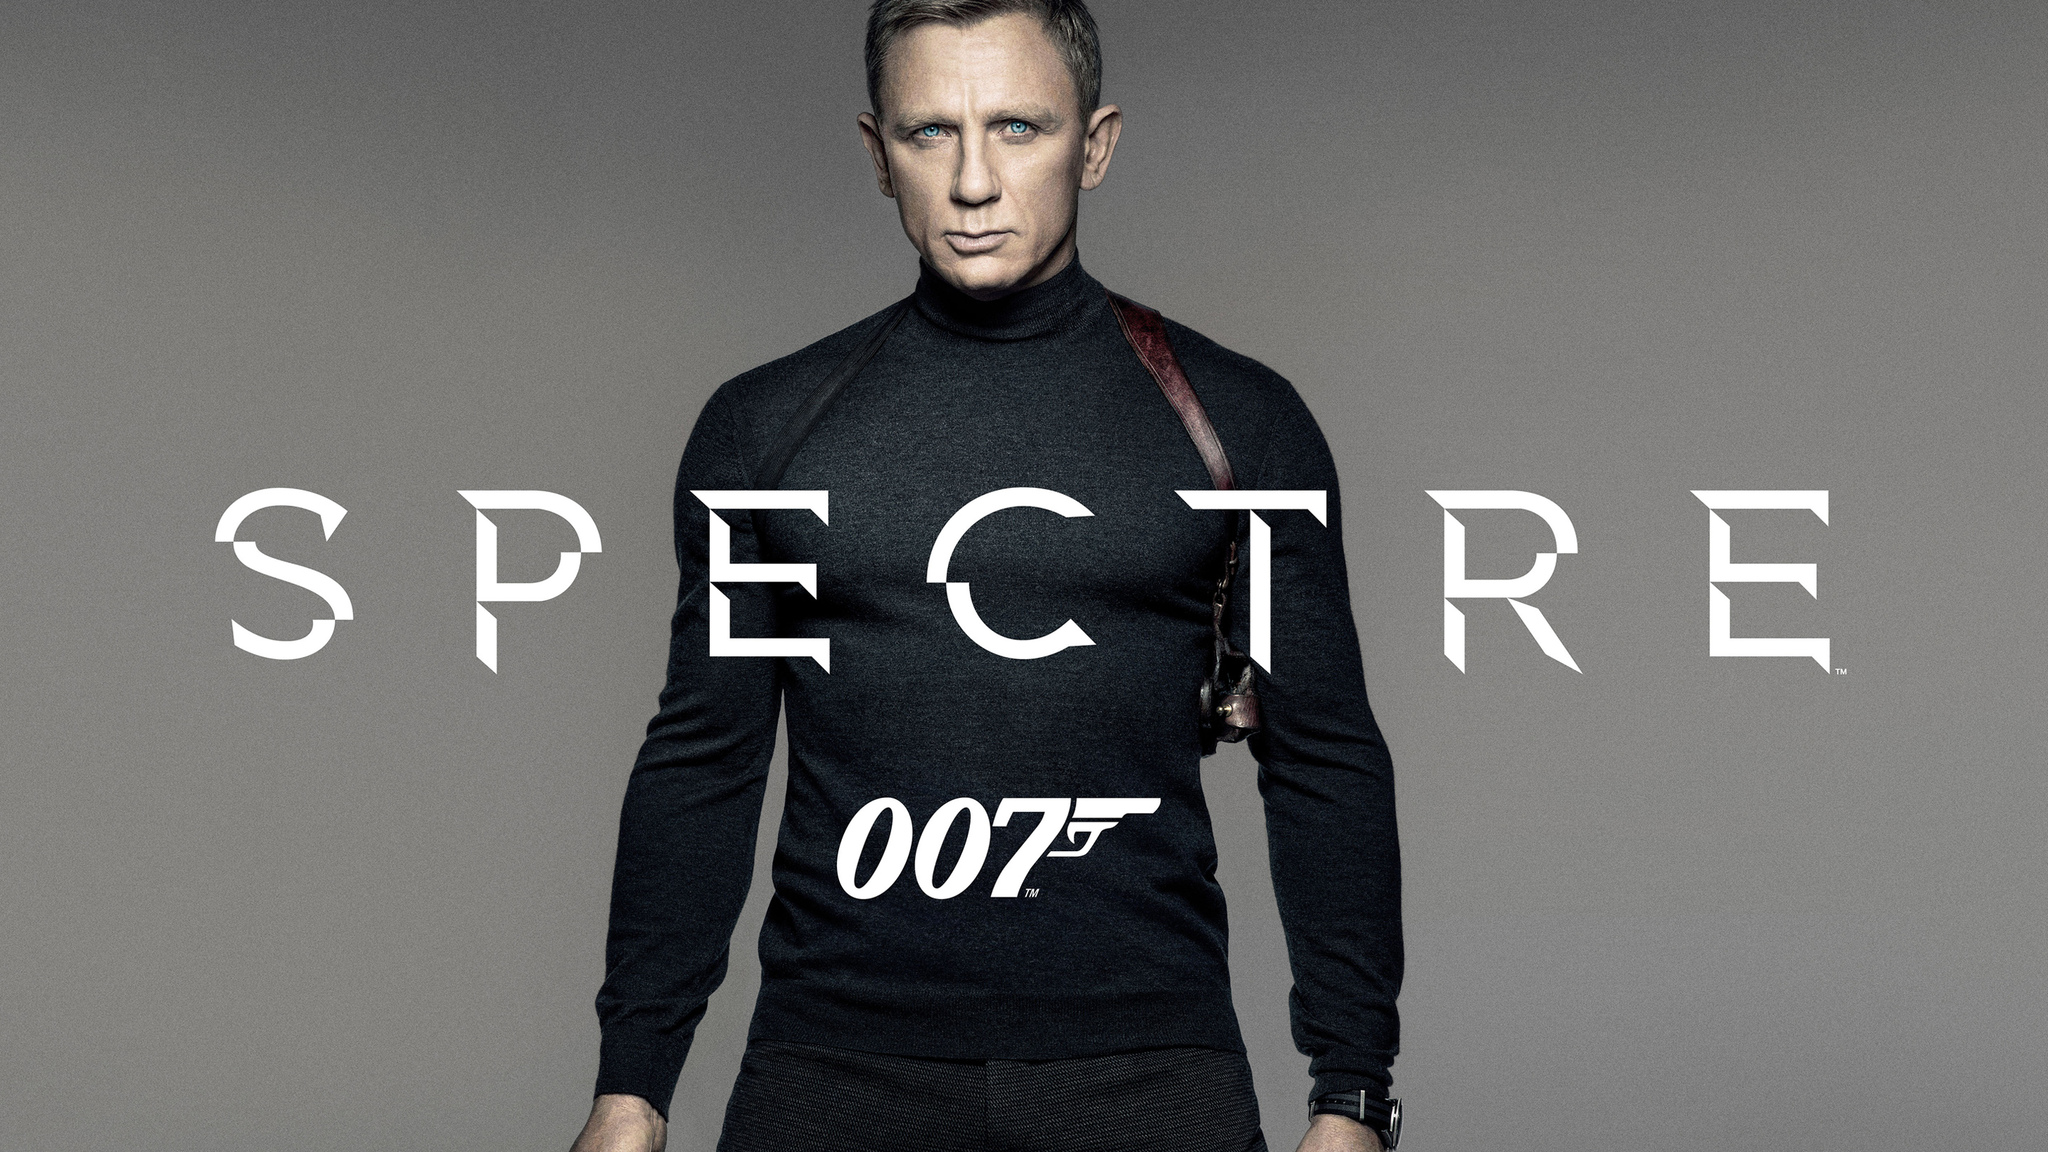 48x1152 Spectre Movie 48x1152 Resolution Hd 4k Wallpapers Images Backgrounds Photos And Pictures